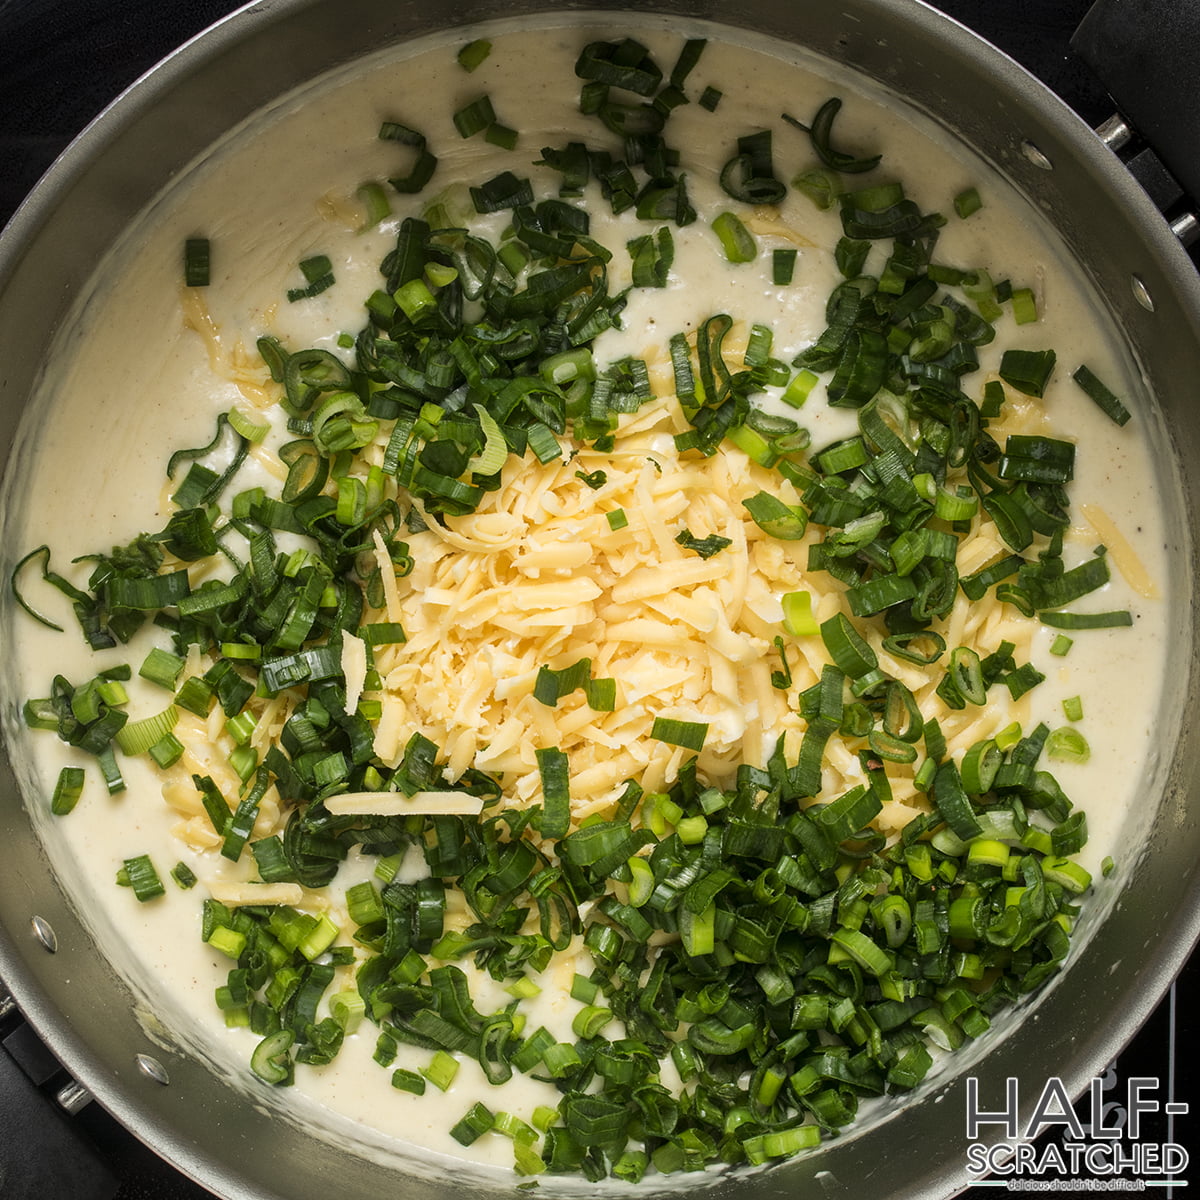 Scallions and gruyere in sauce